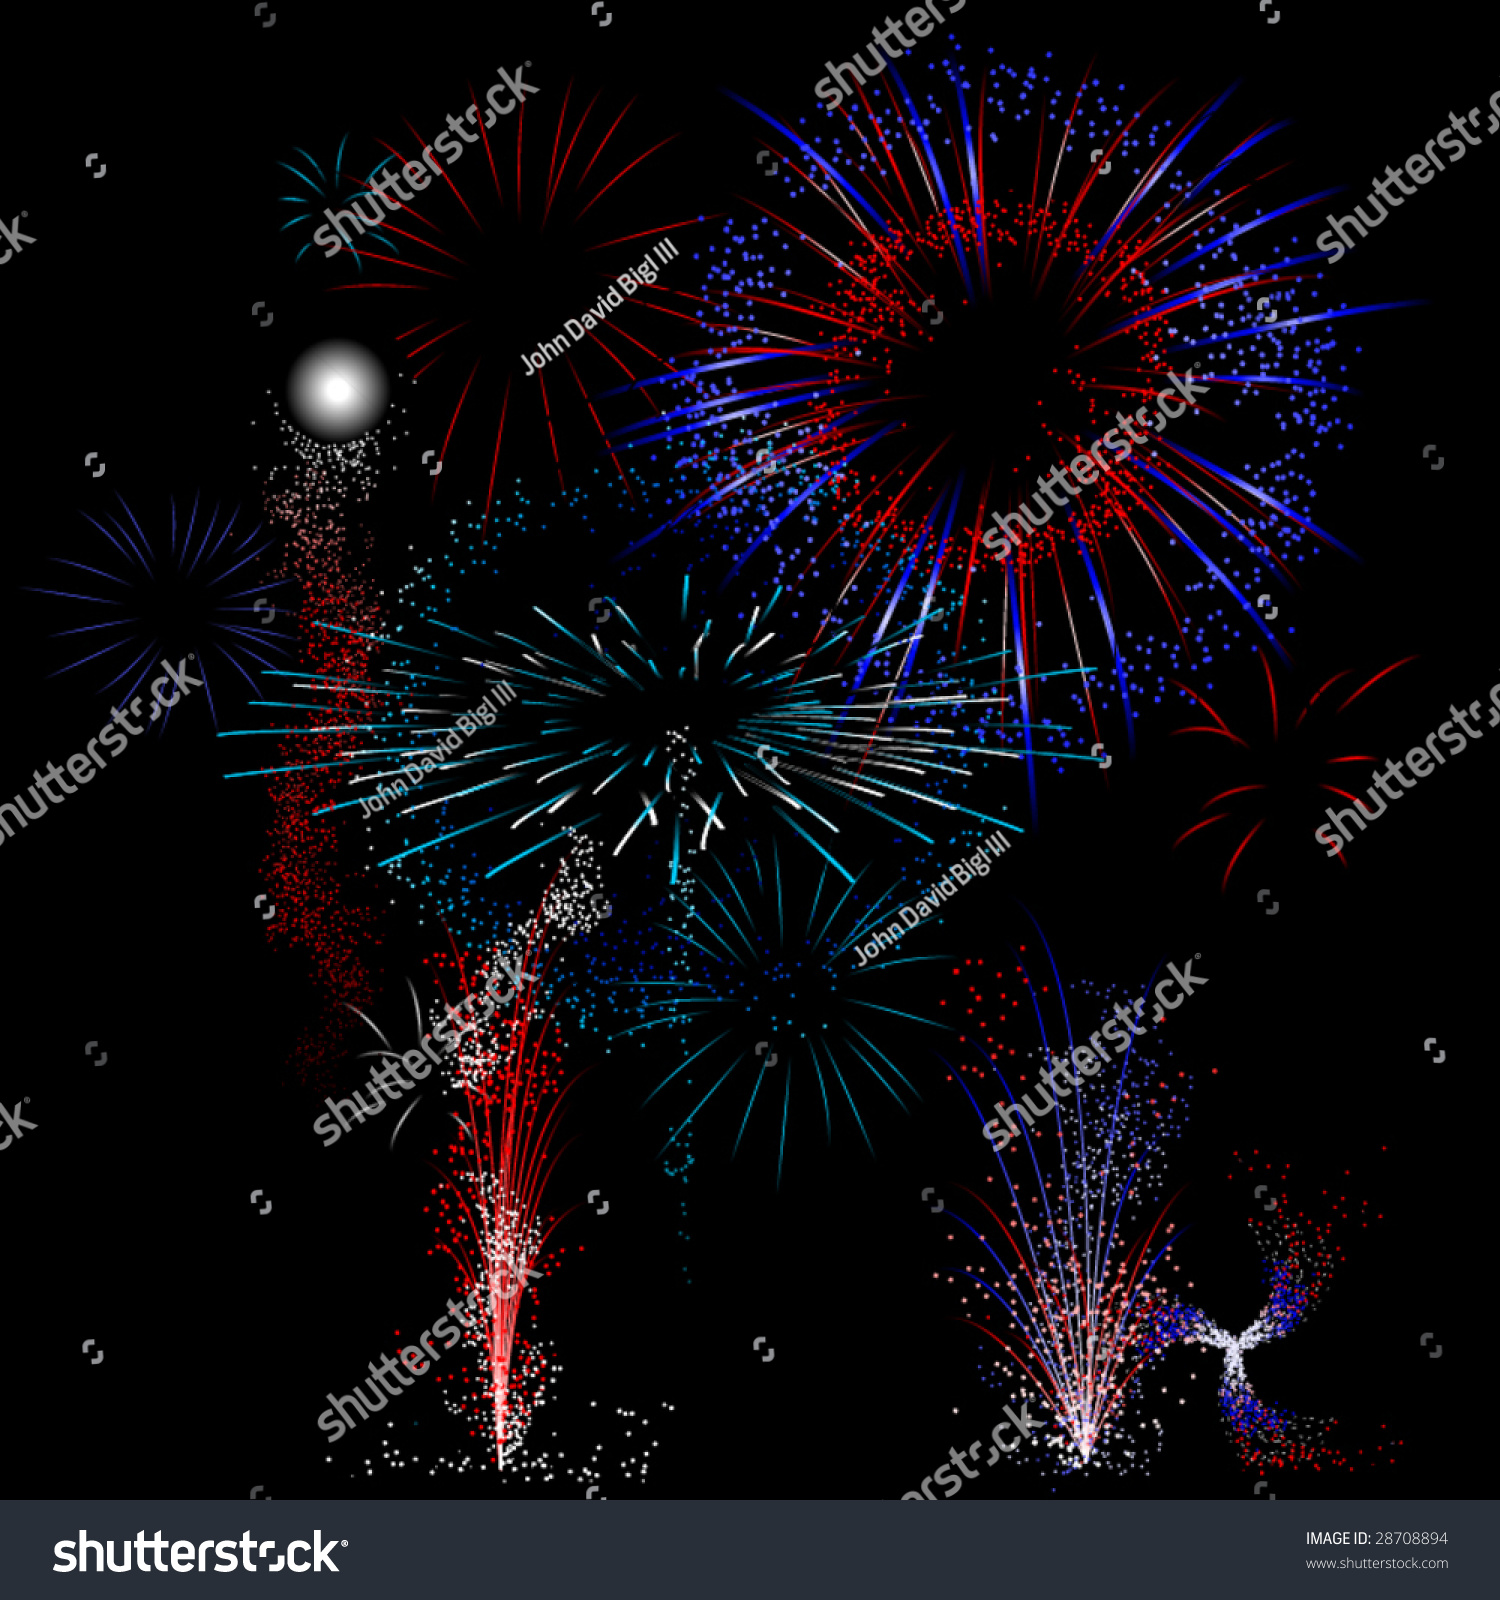 Vector Fireworks Background - Red White And Blue ...